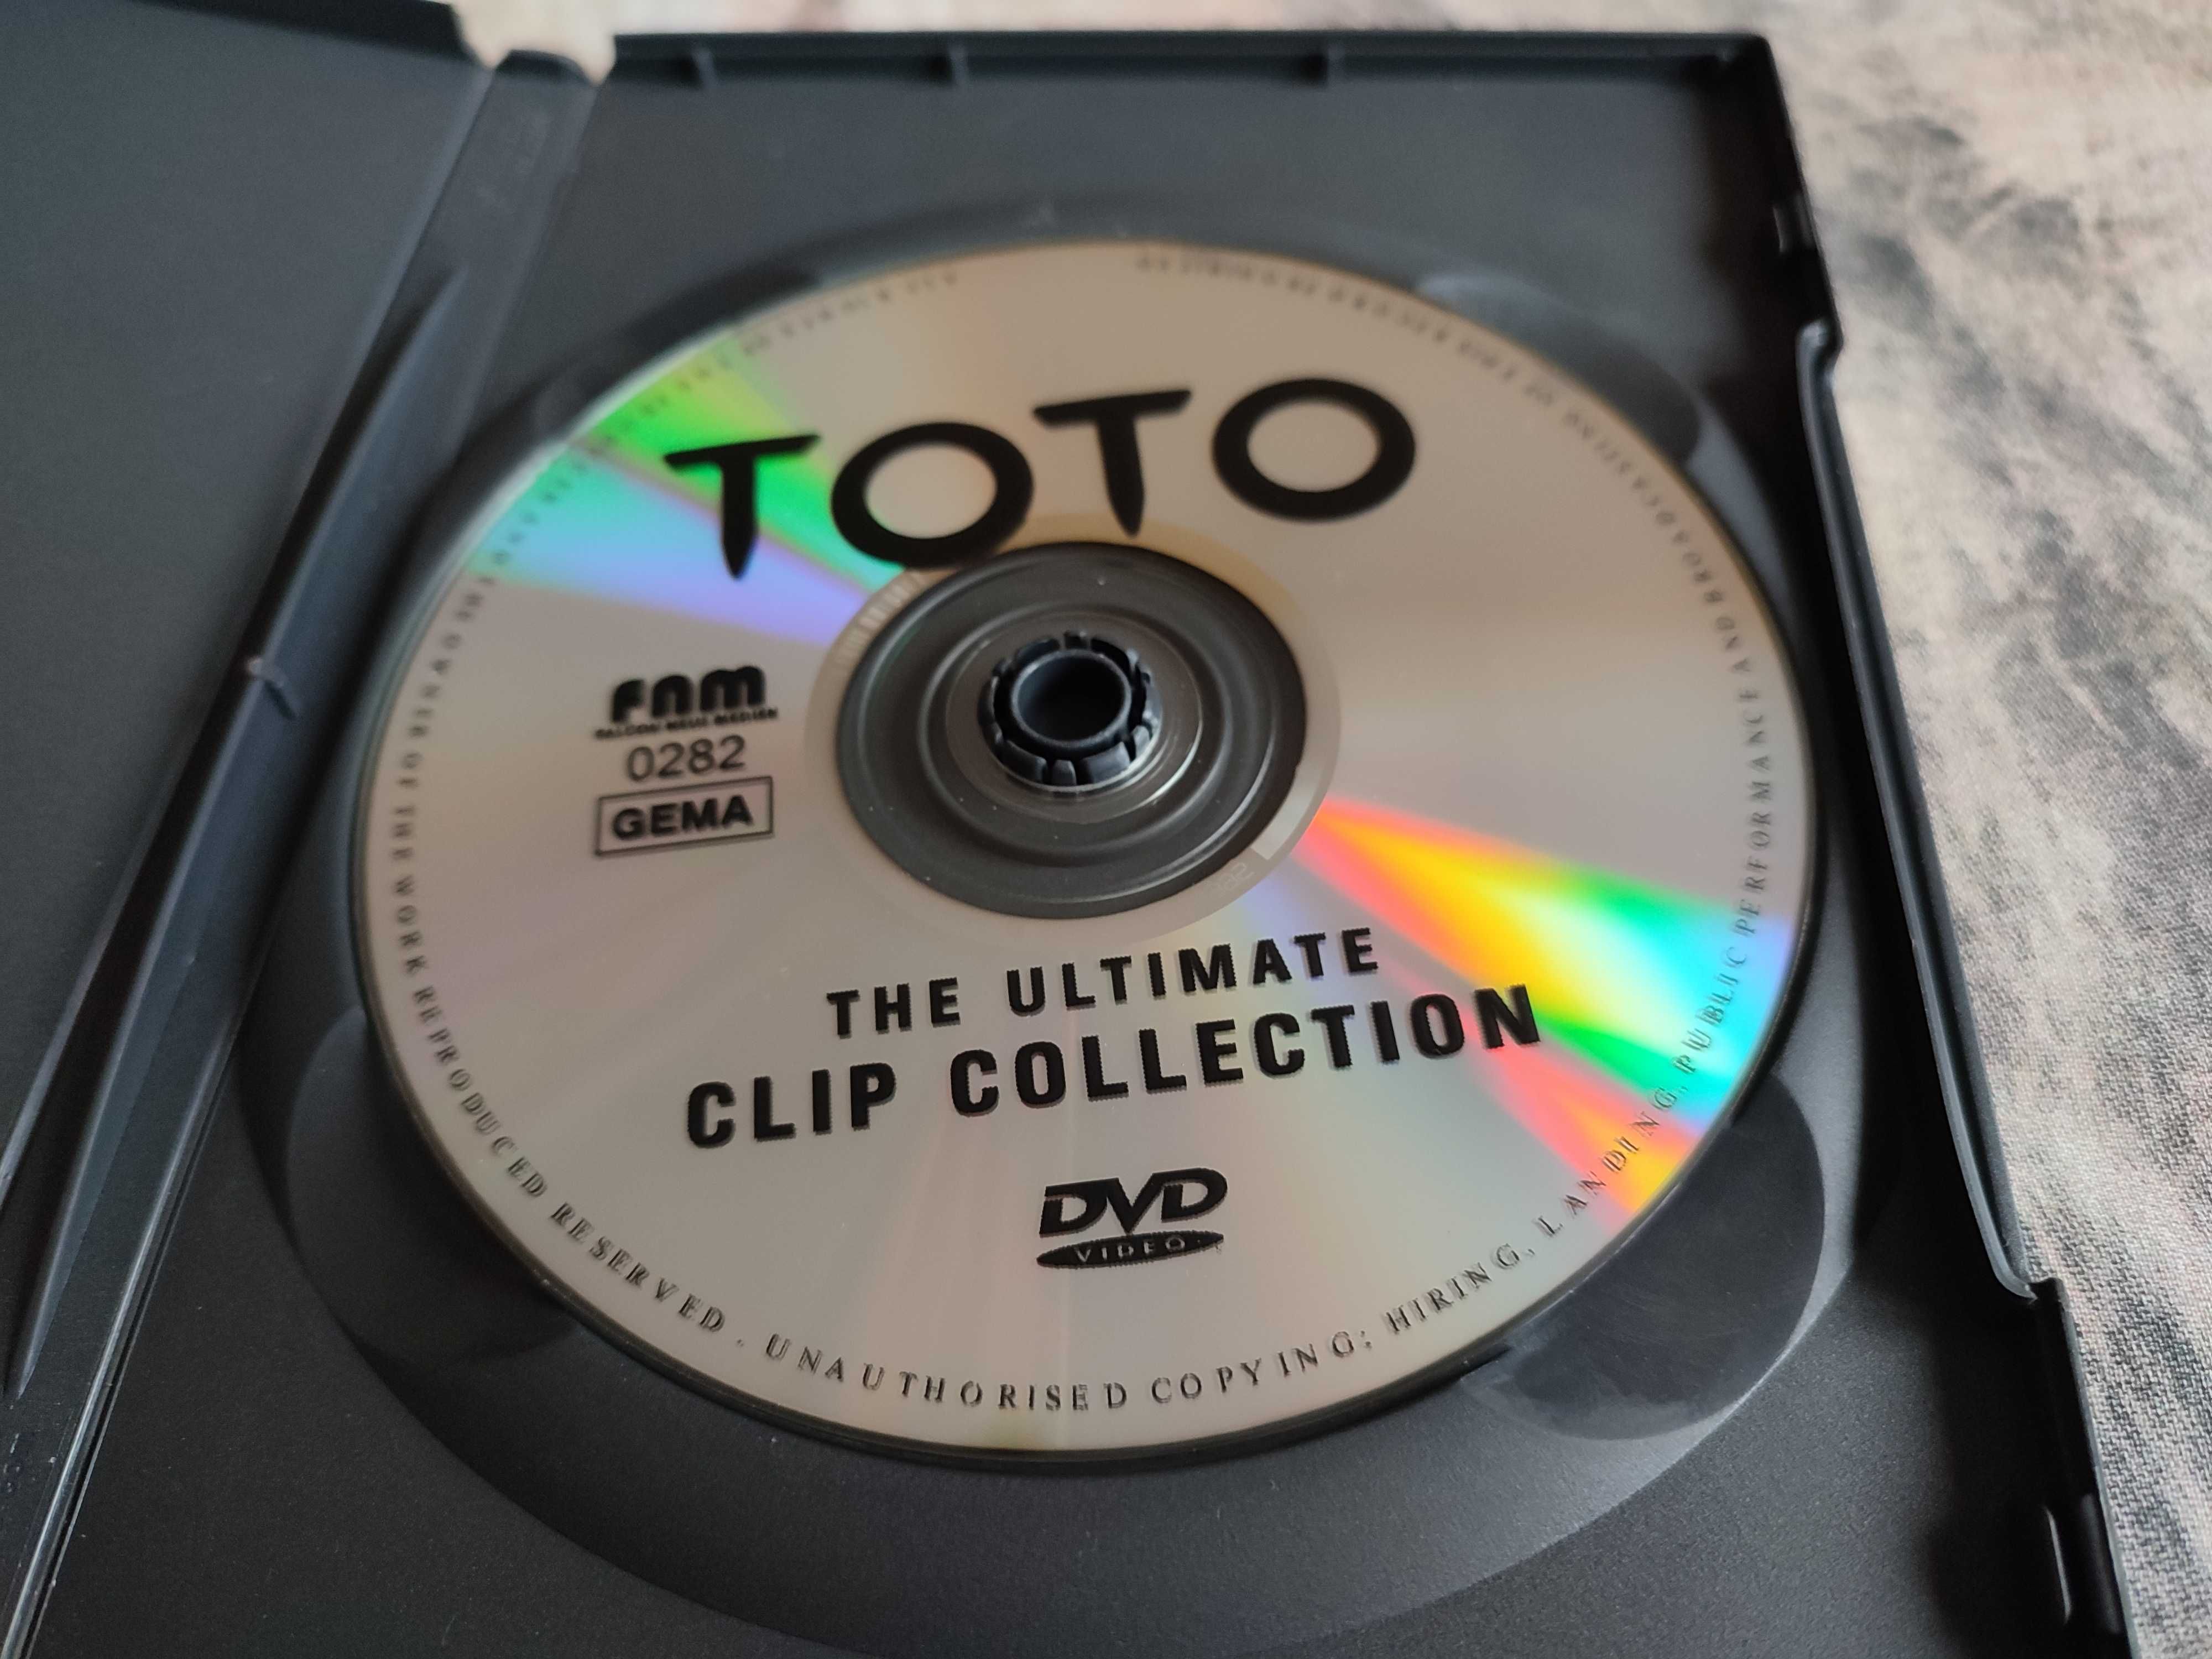 TOTO - 2 x DVD - "Africa-Live" i "Ultimate Clip Collection", stan +bdb